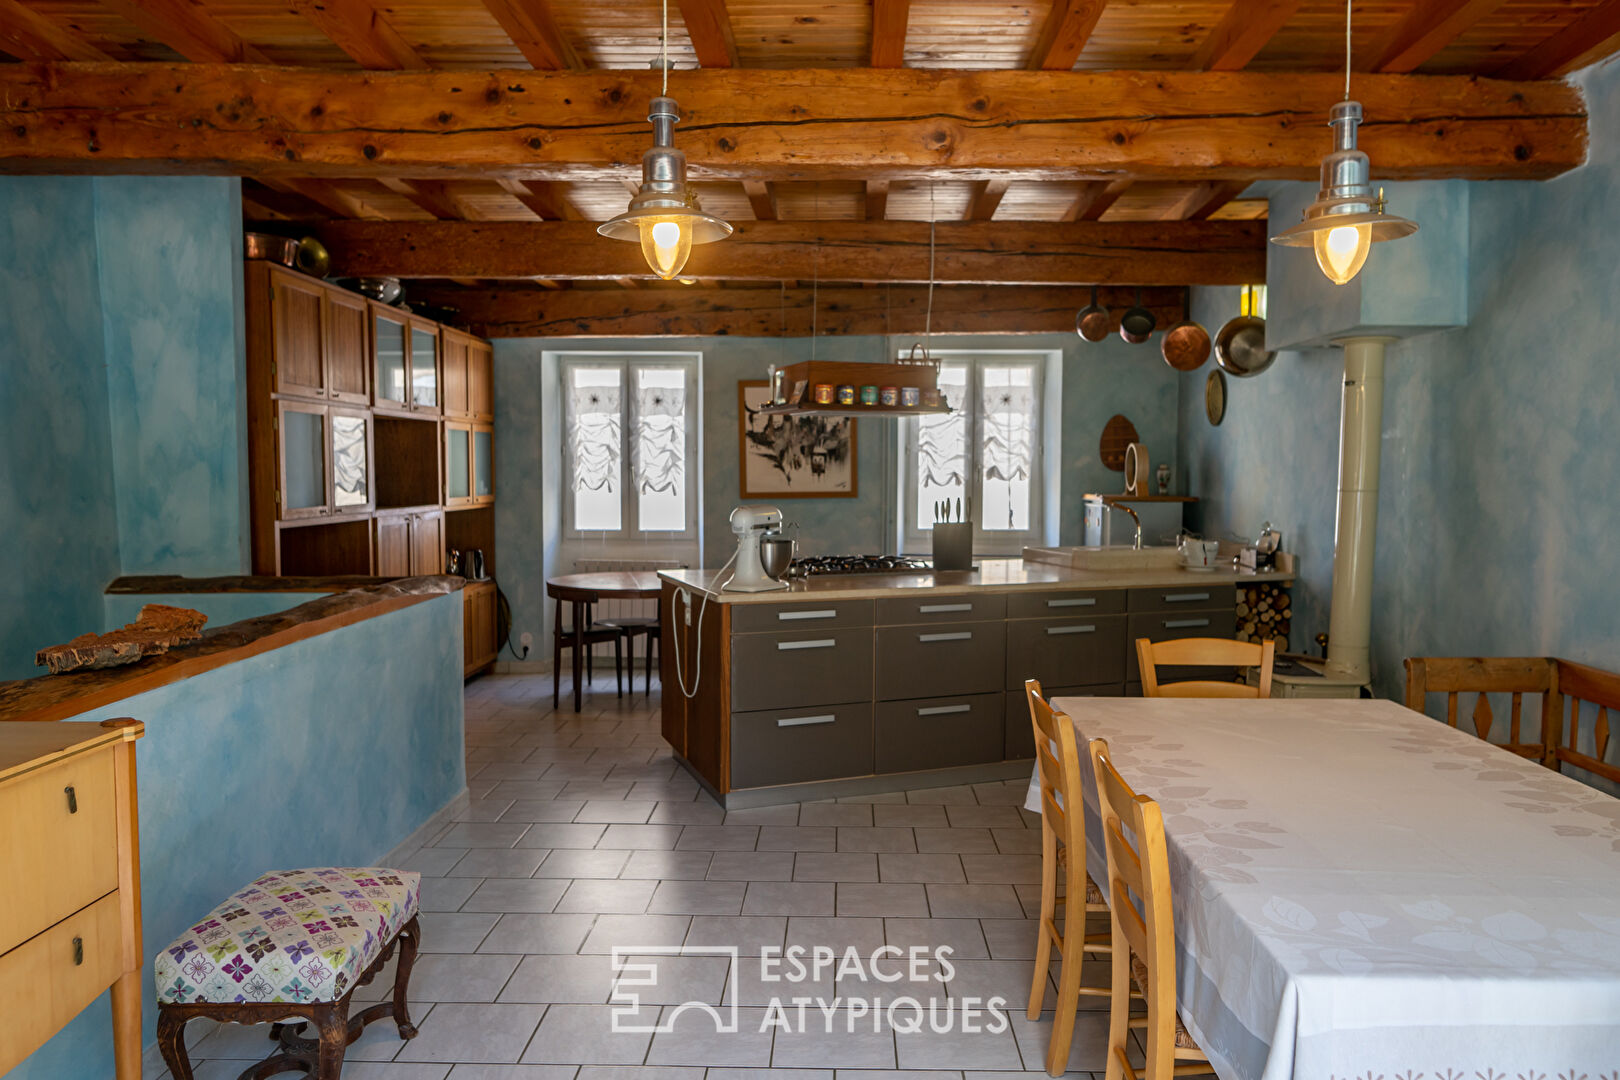 In Drôme, a discreet and surprising village house.